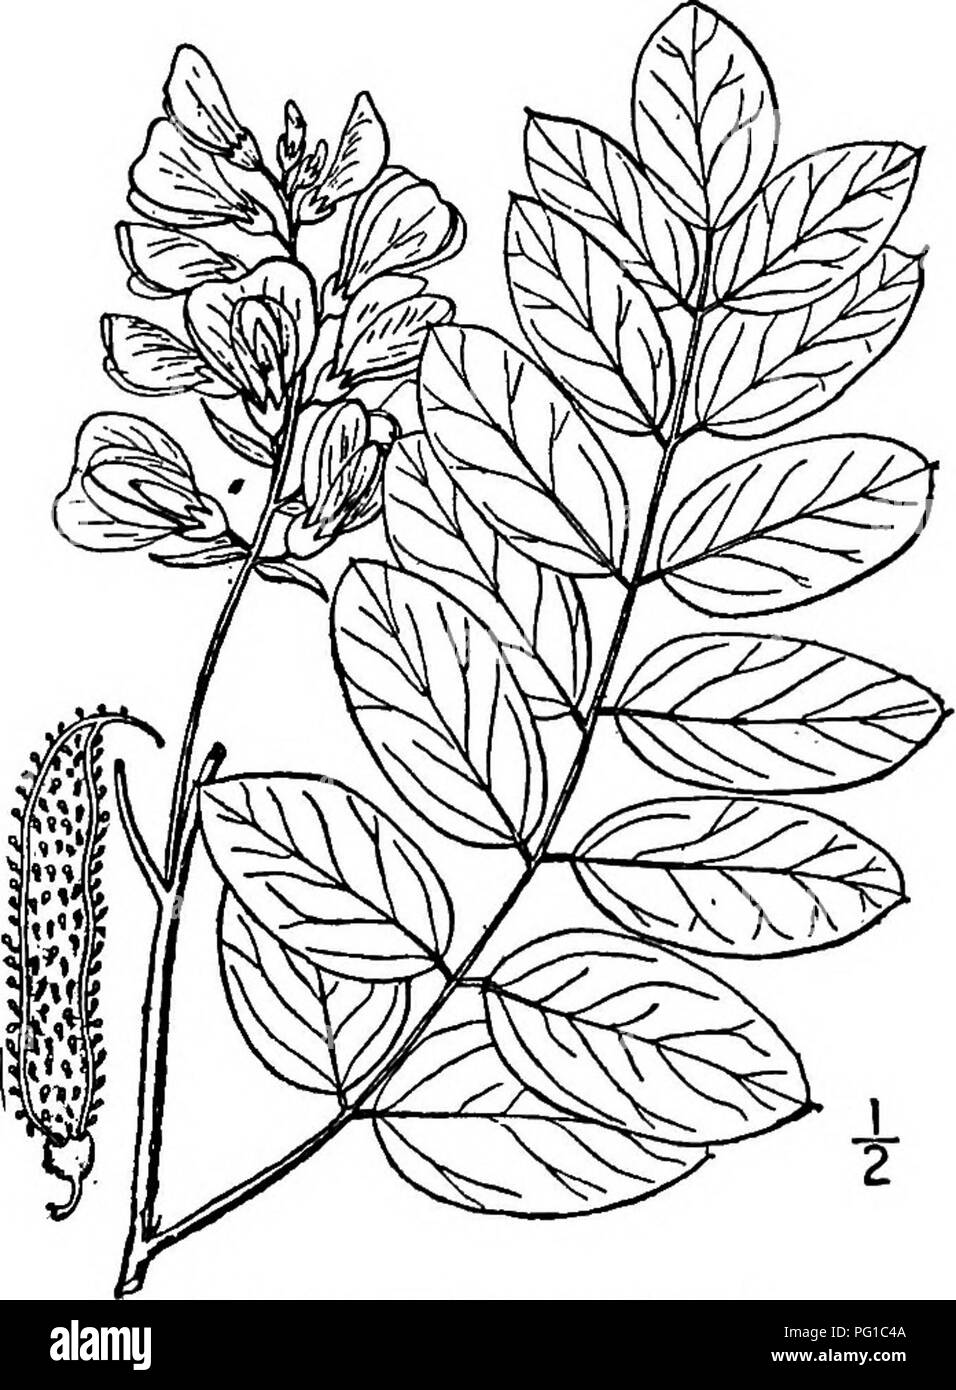 . North American trees : being descriptions and illustrations of the trees growing independently of cultivation in North America, north of Mexico and the West Indies . Trees. Fig. 512. — Locust. long, awl-shaped, soon developing into hard, straight or slightly curved spines, becoming 2.5 cm. long and often persisting for several years. The flowers appear from April to June in loose racemes 10 to 12.5 cm. long, with 10 to 25 flowers on pedicels 6 to 15 mn&gt;. long; they are white, with a yel- low spot on the standard and very fragrant. The pod is linear, sUghtly curved, smooth, reddish brown,  Stock Photo